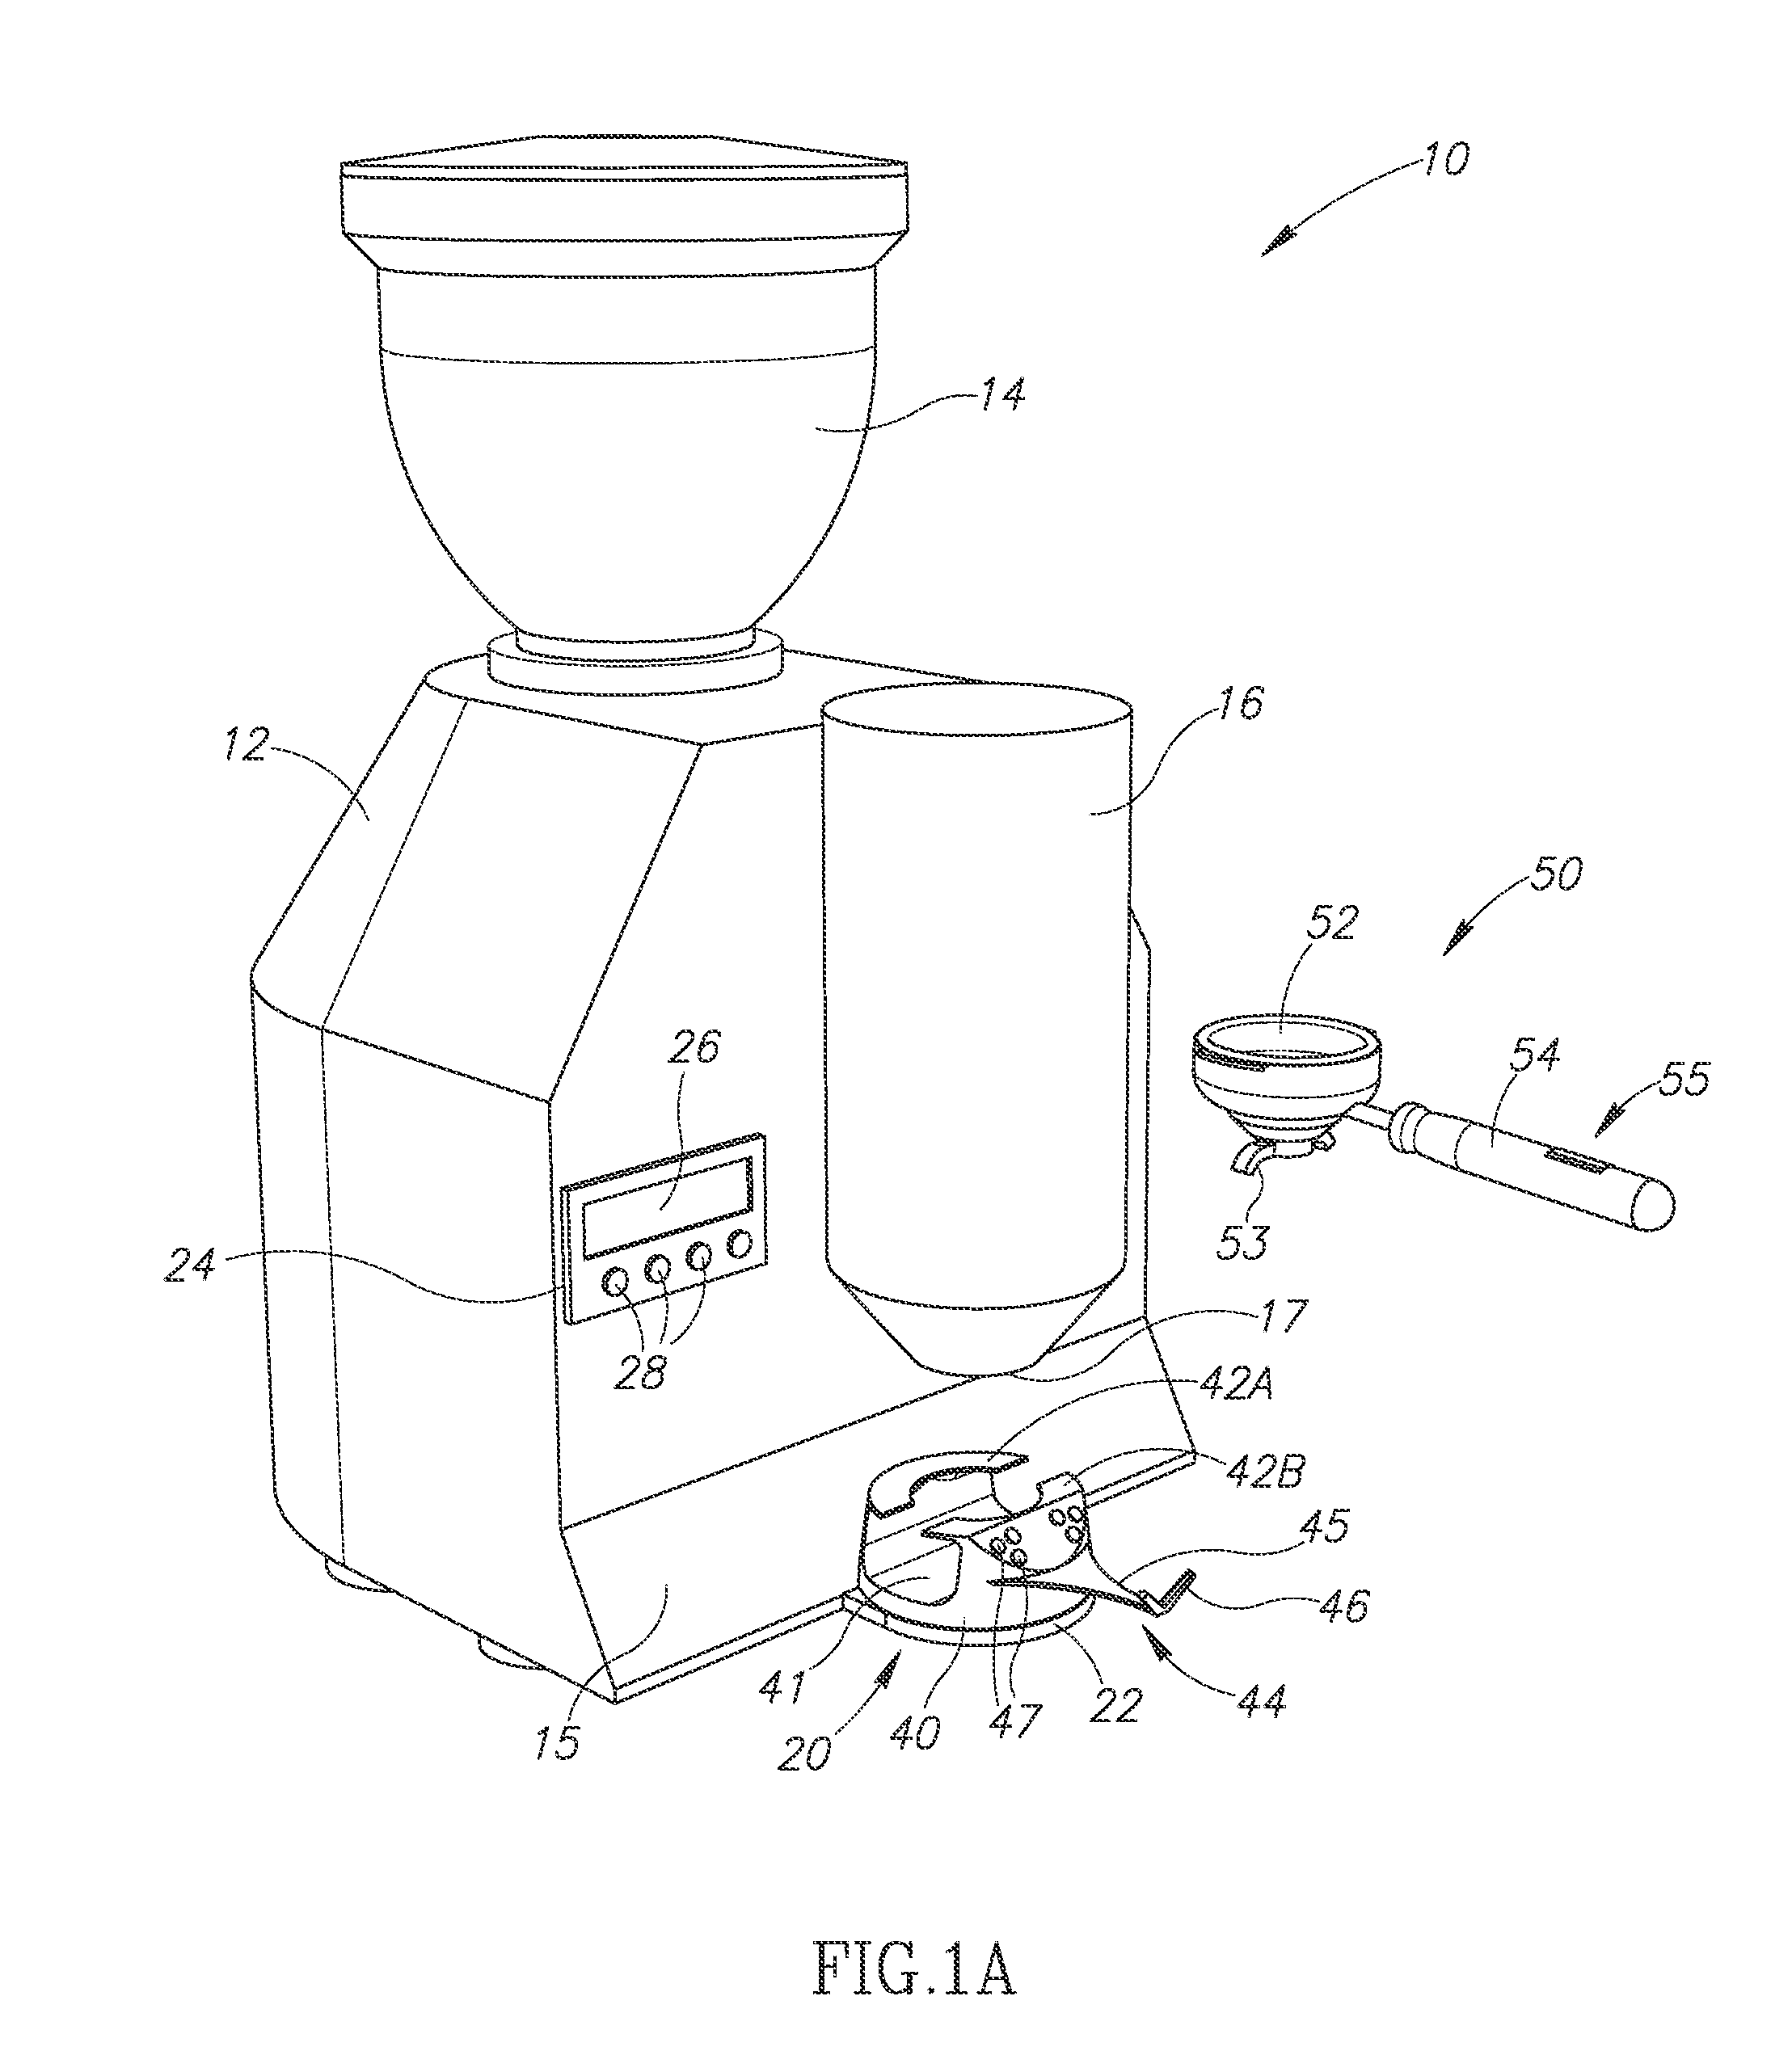 Apparatus for measurement of coffee